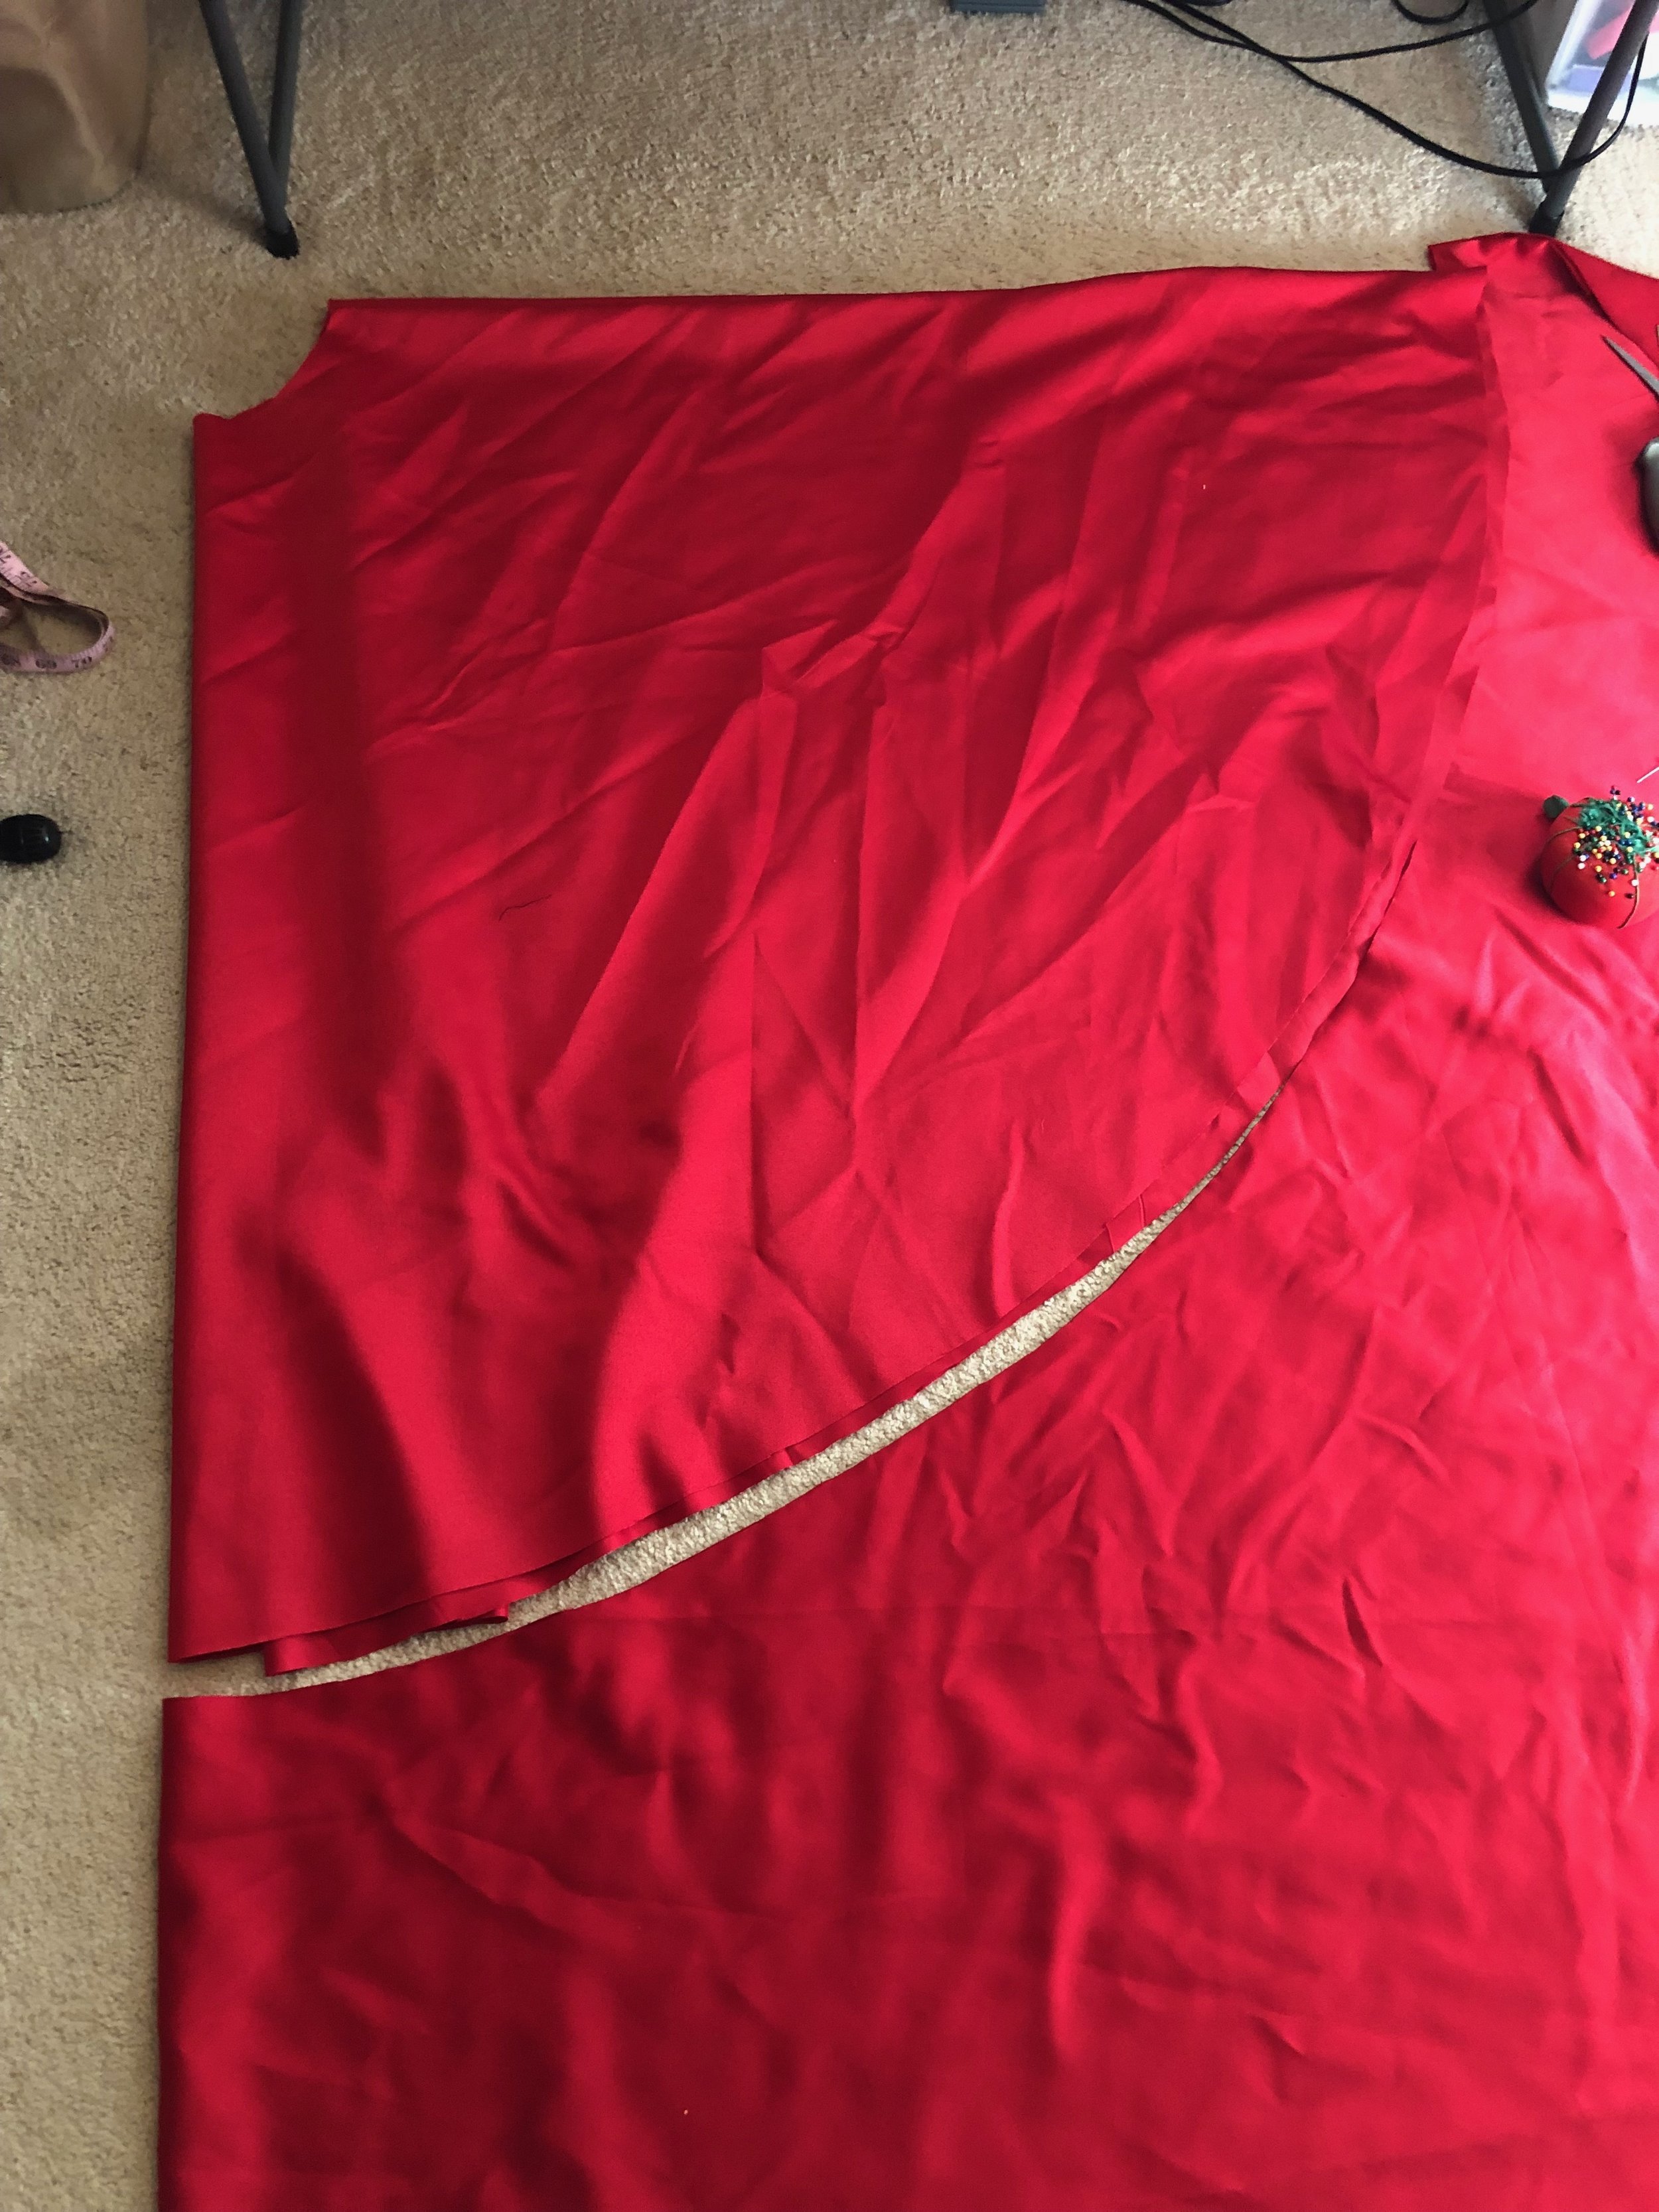 White Christmas, Red Dress pt 2 Cape-let and Skirt — Casey Renee Cosplay